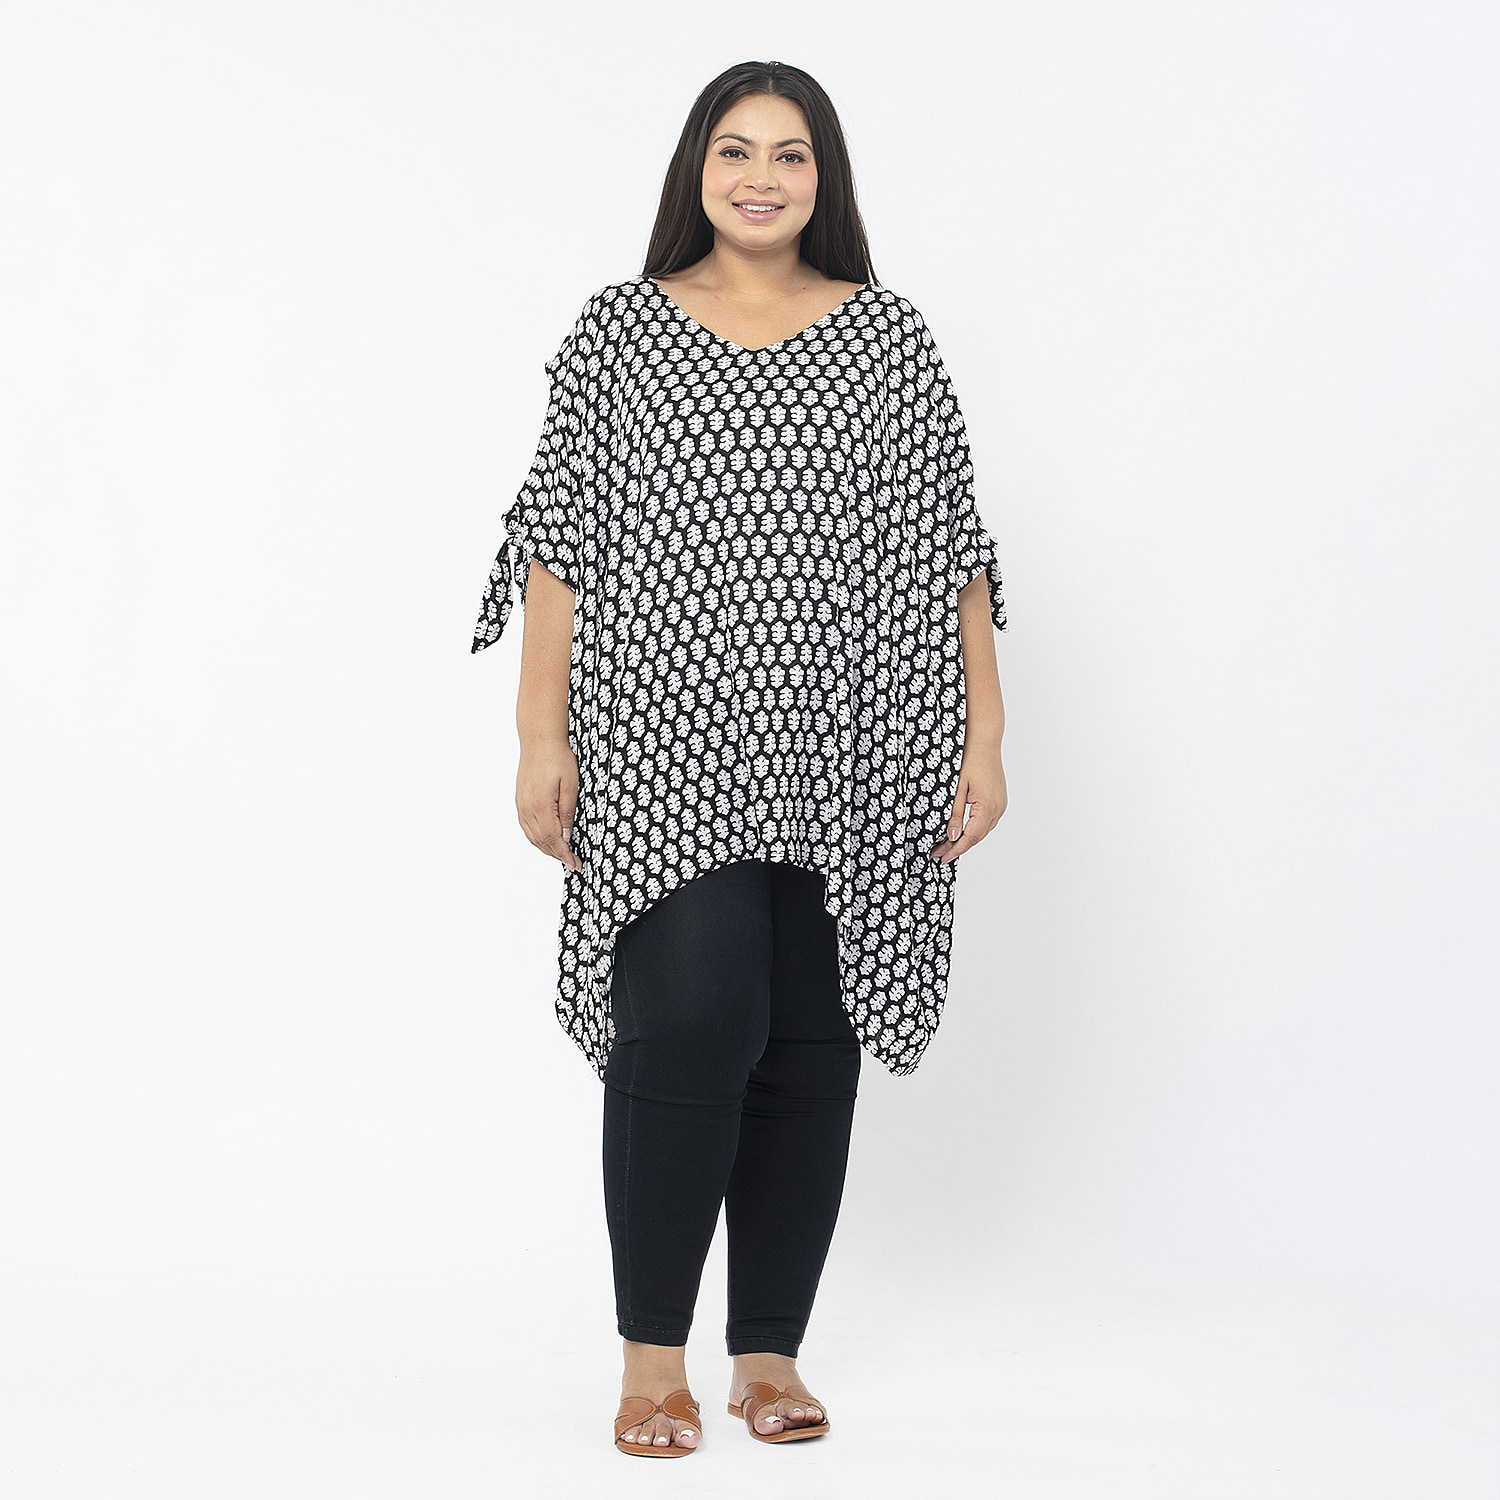 Tamsy-Viscose-Printed-Top-Size-99x1-cm-Black-Off-White